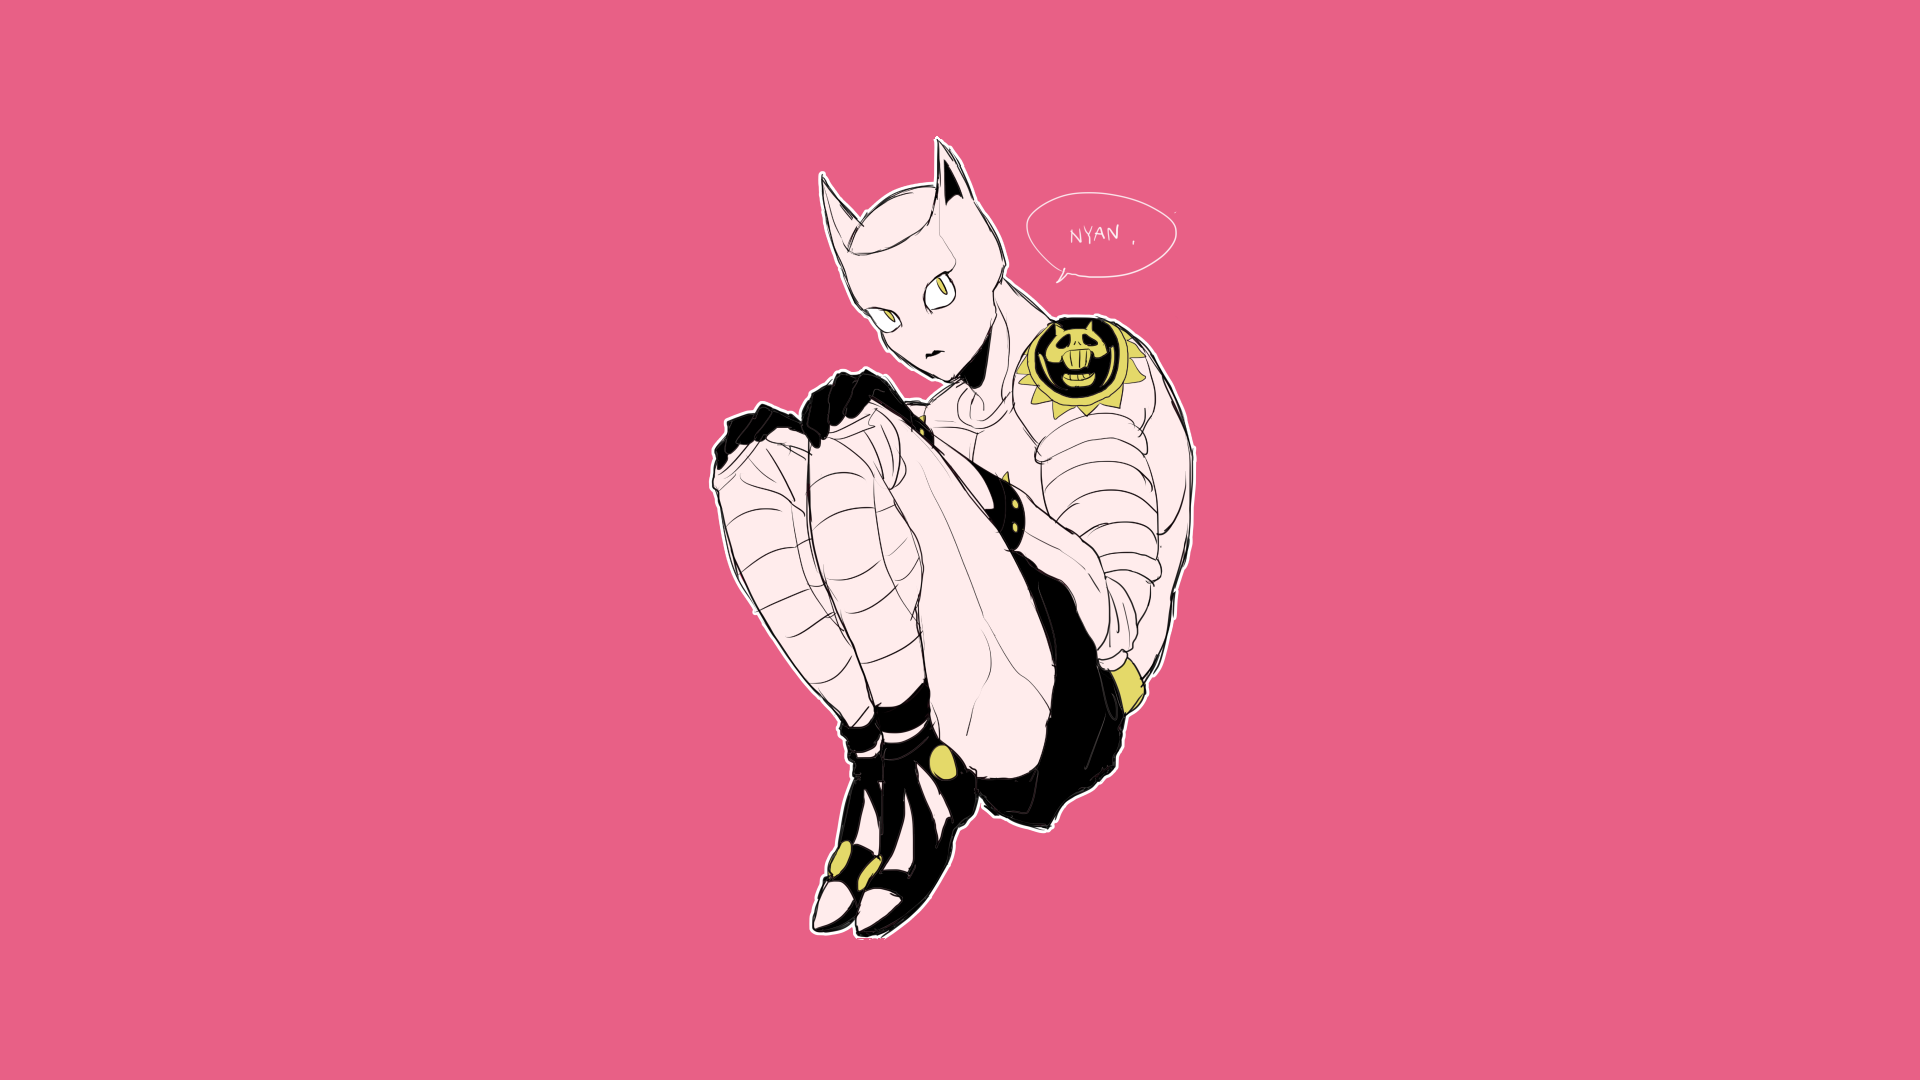 𝐛𝐞𝐥𝐥𝐮𝐦𝐚  here is some basic ass killer queen phone